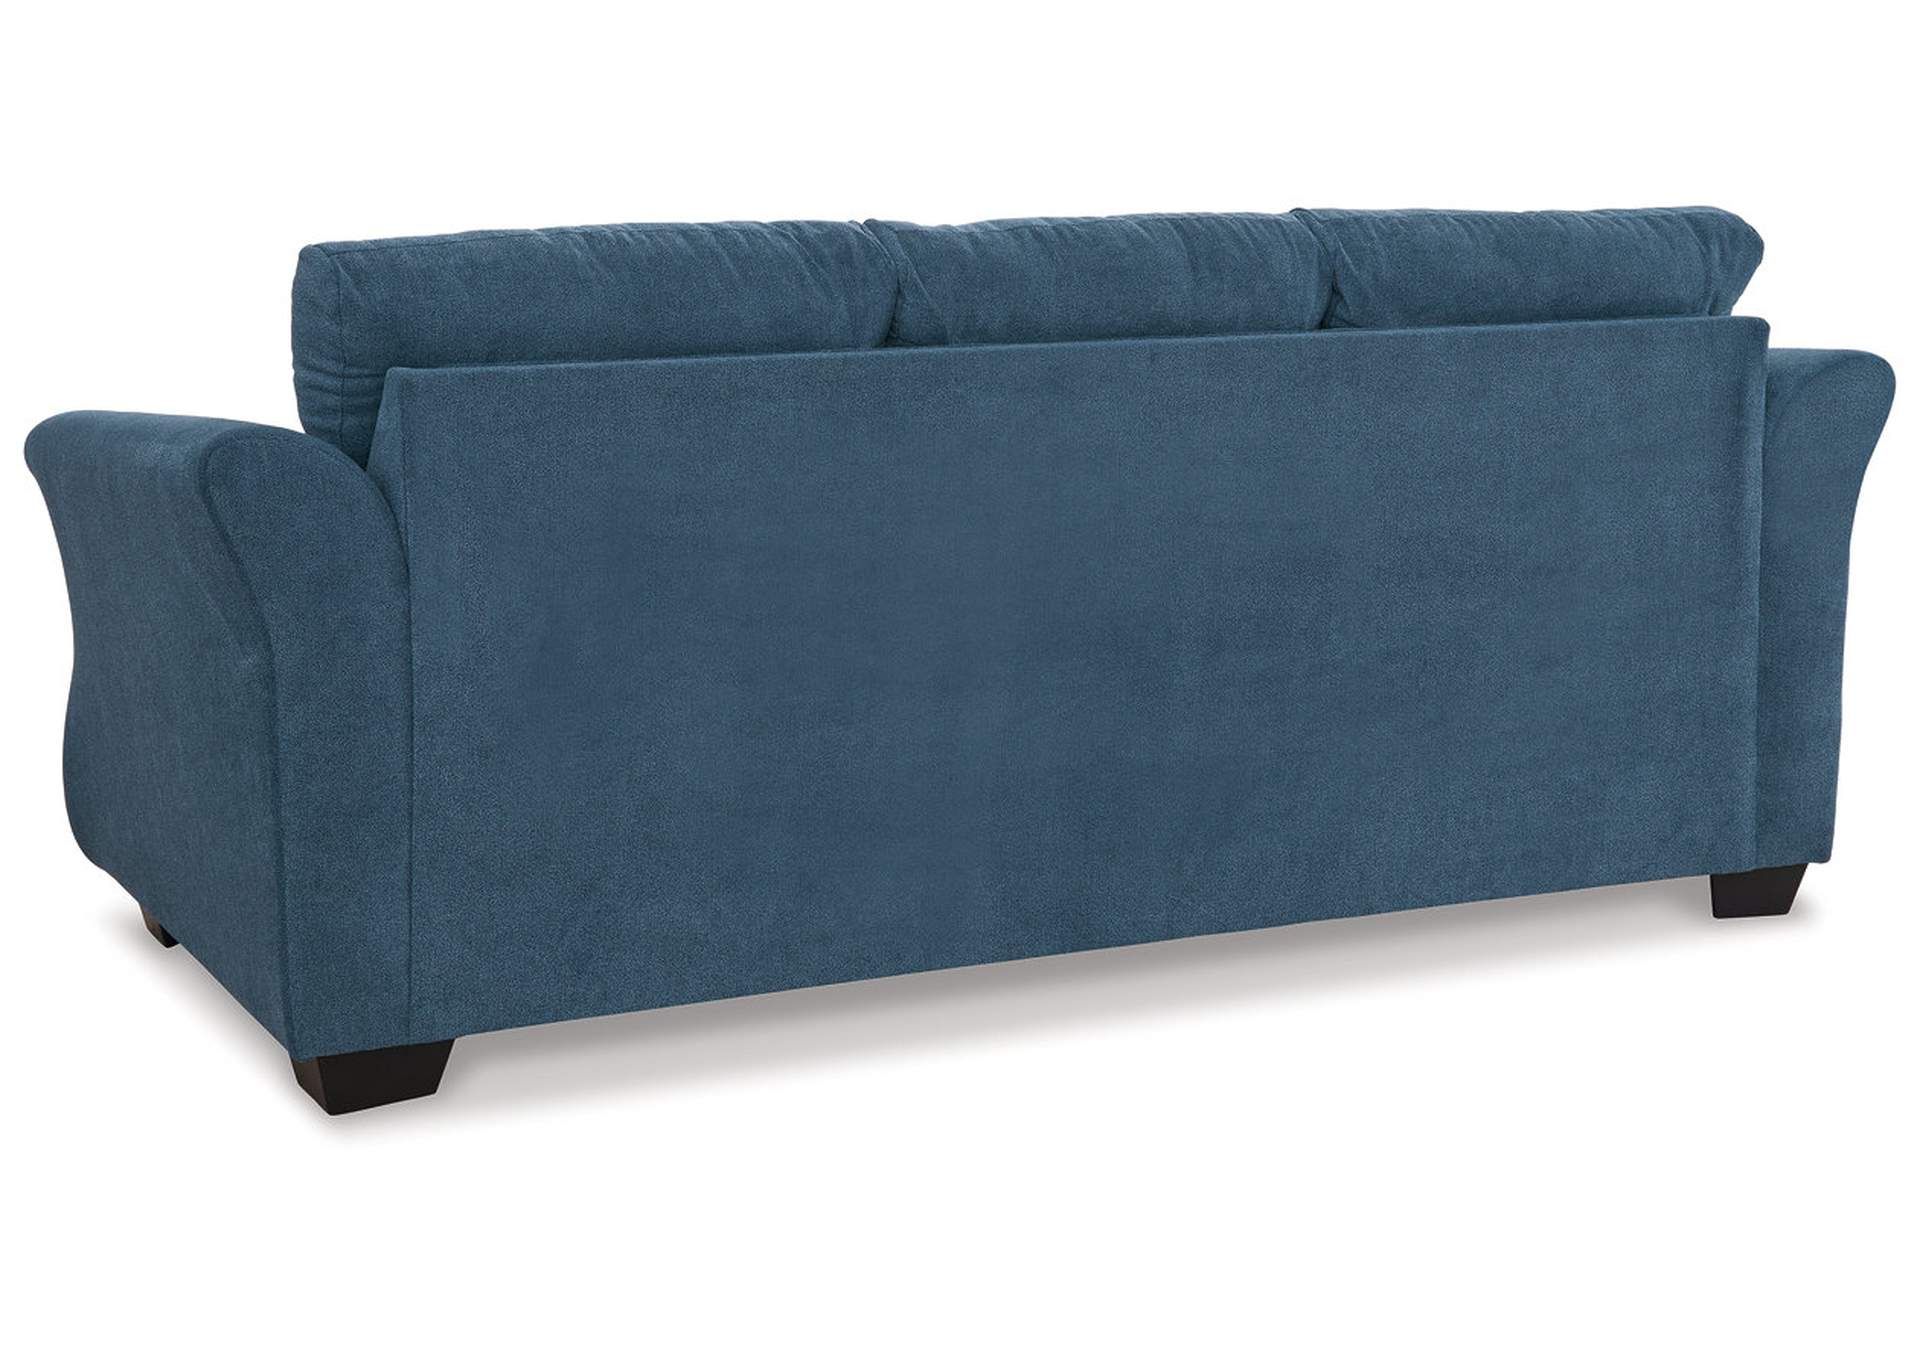 Miravel Sofa and Loveseat,Signature Design By Ashley